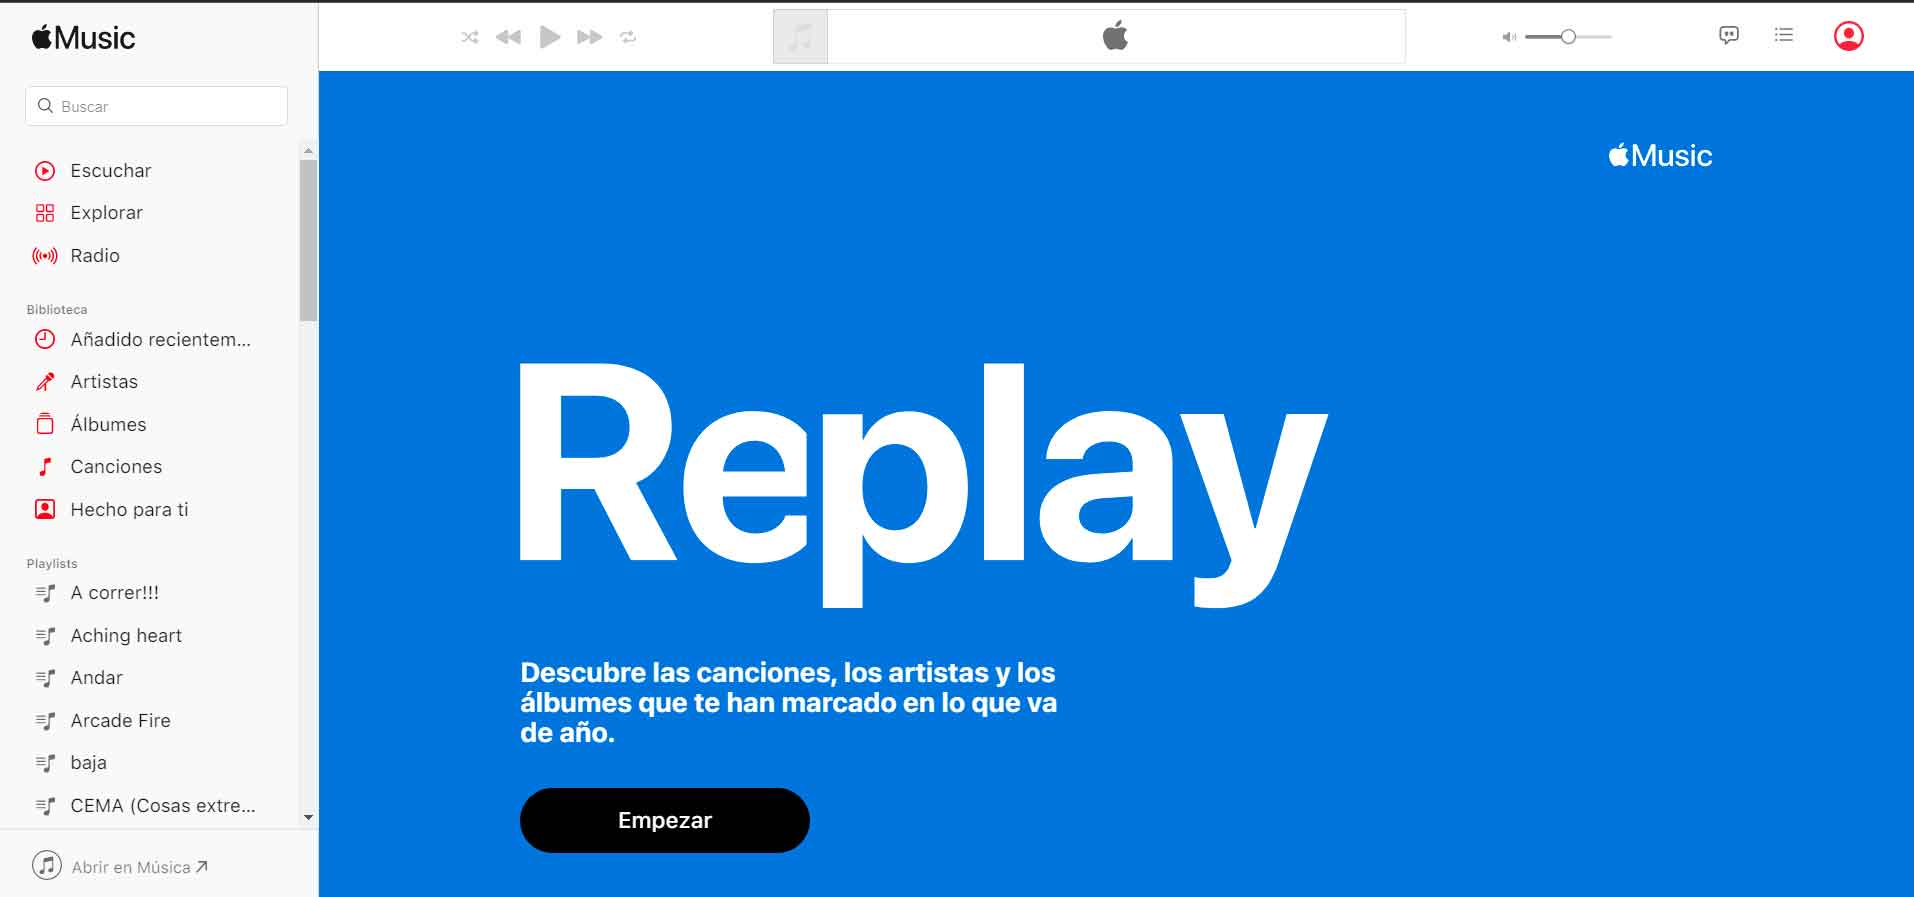 Apple Music already offers you your Replay 2023